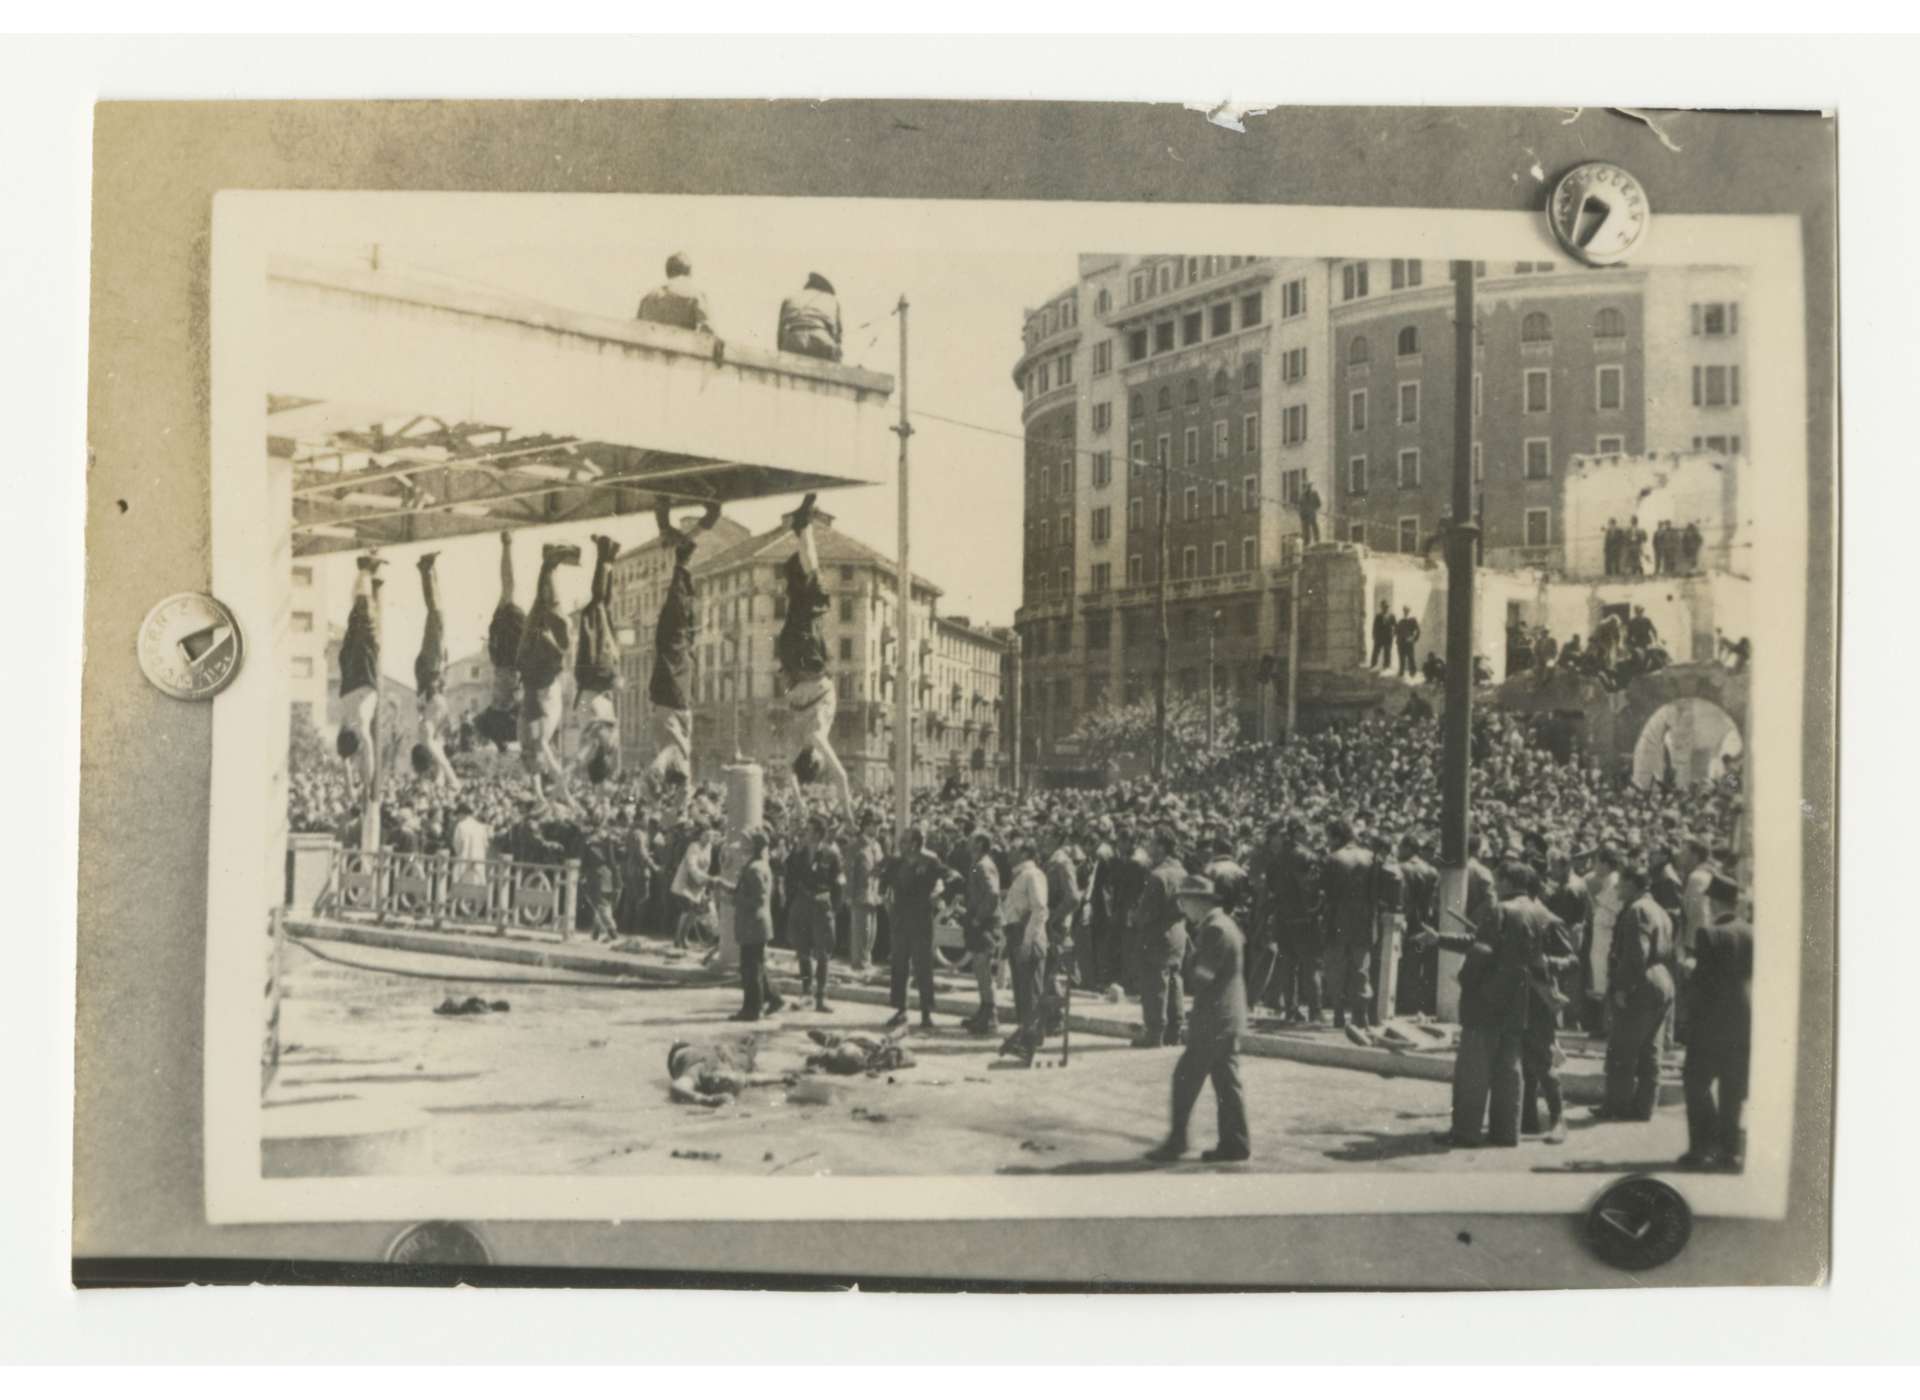 Corpses of Benito Mussolini and his compatriots exhibited at the Piazzale Loreto in Milan, April 29, 1945. Gift of Dorothy Poitevent, from the Collection of The National WWII Museum, 2007.243.189.